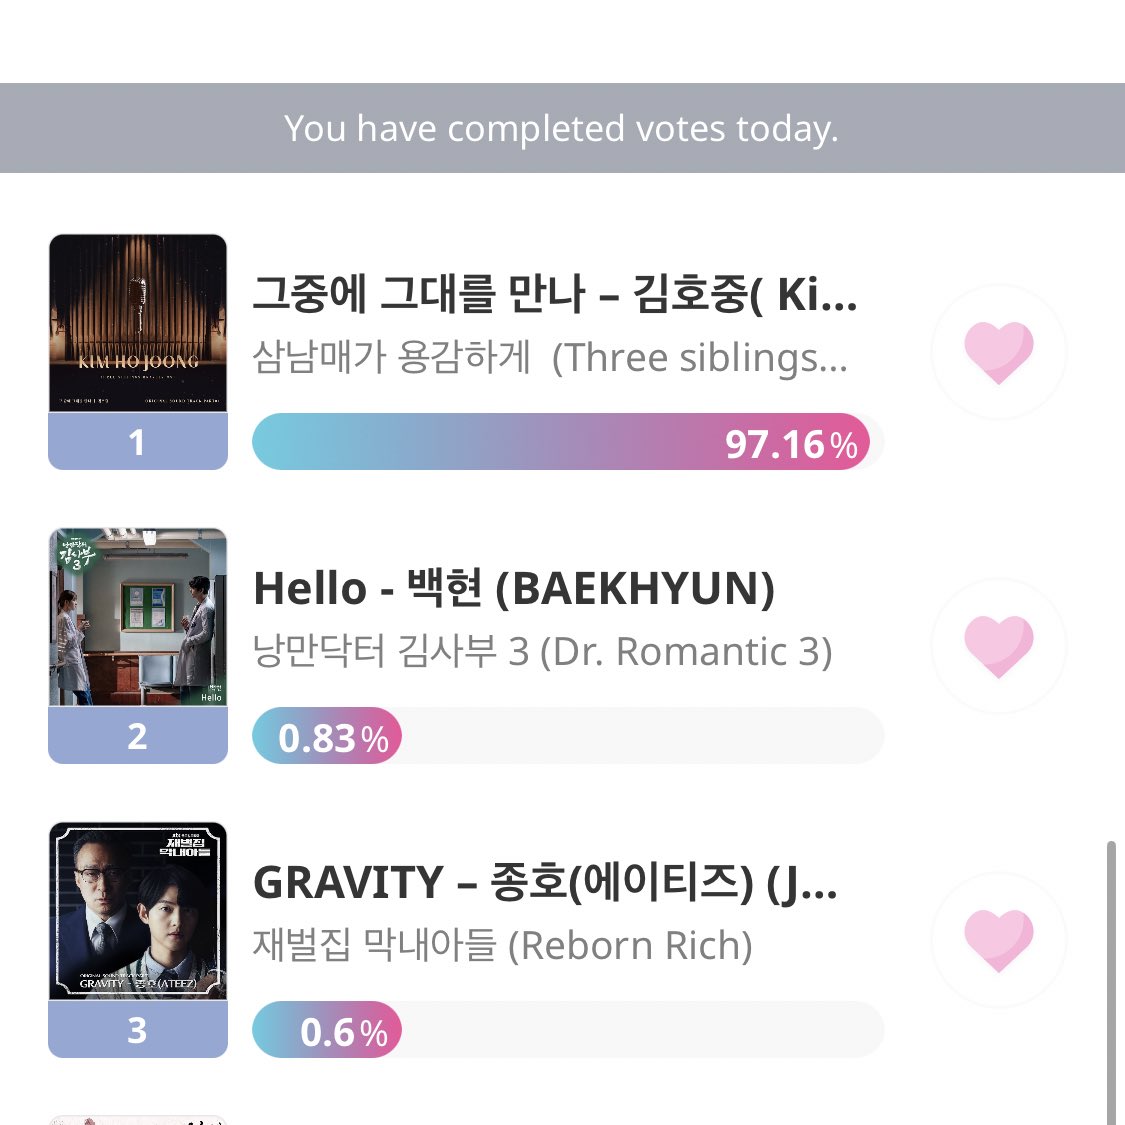 JONGHO OST ENTERED 3RD PLACE !!! THE GAP TO 2ND PLACE IS 1.8K !!! WE CAN EASILY GET IT SO VOTE ON IDOLCHAMP NOW